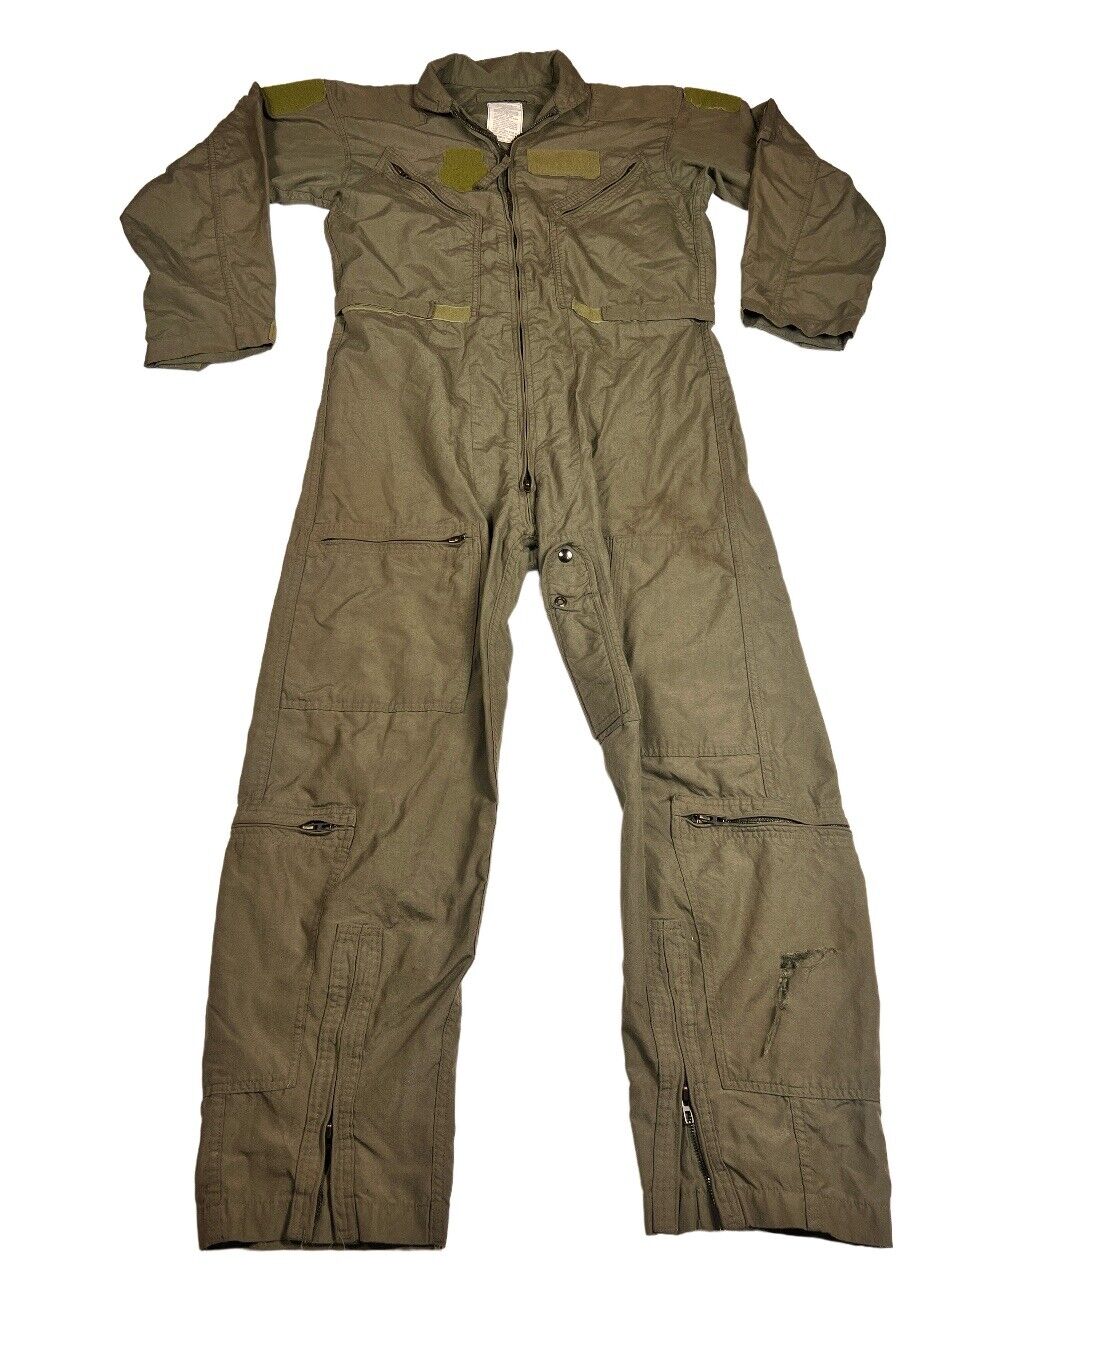 Vintage Military Flight Suit Coveralls Flyers Fighter Sage Green USA Size 42X30